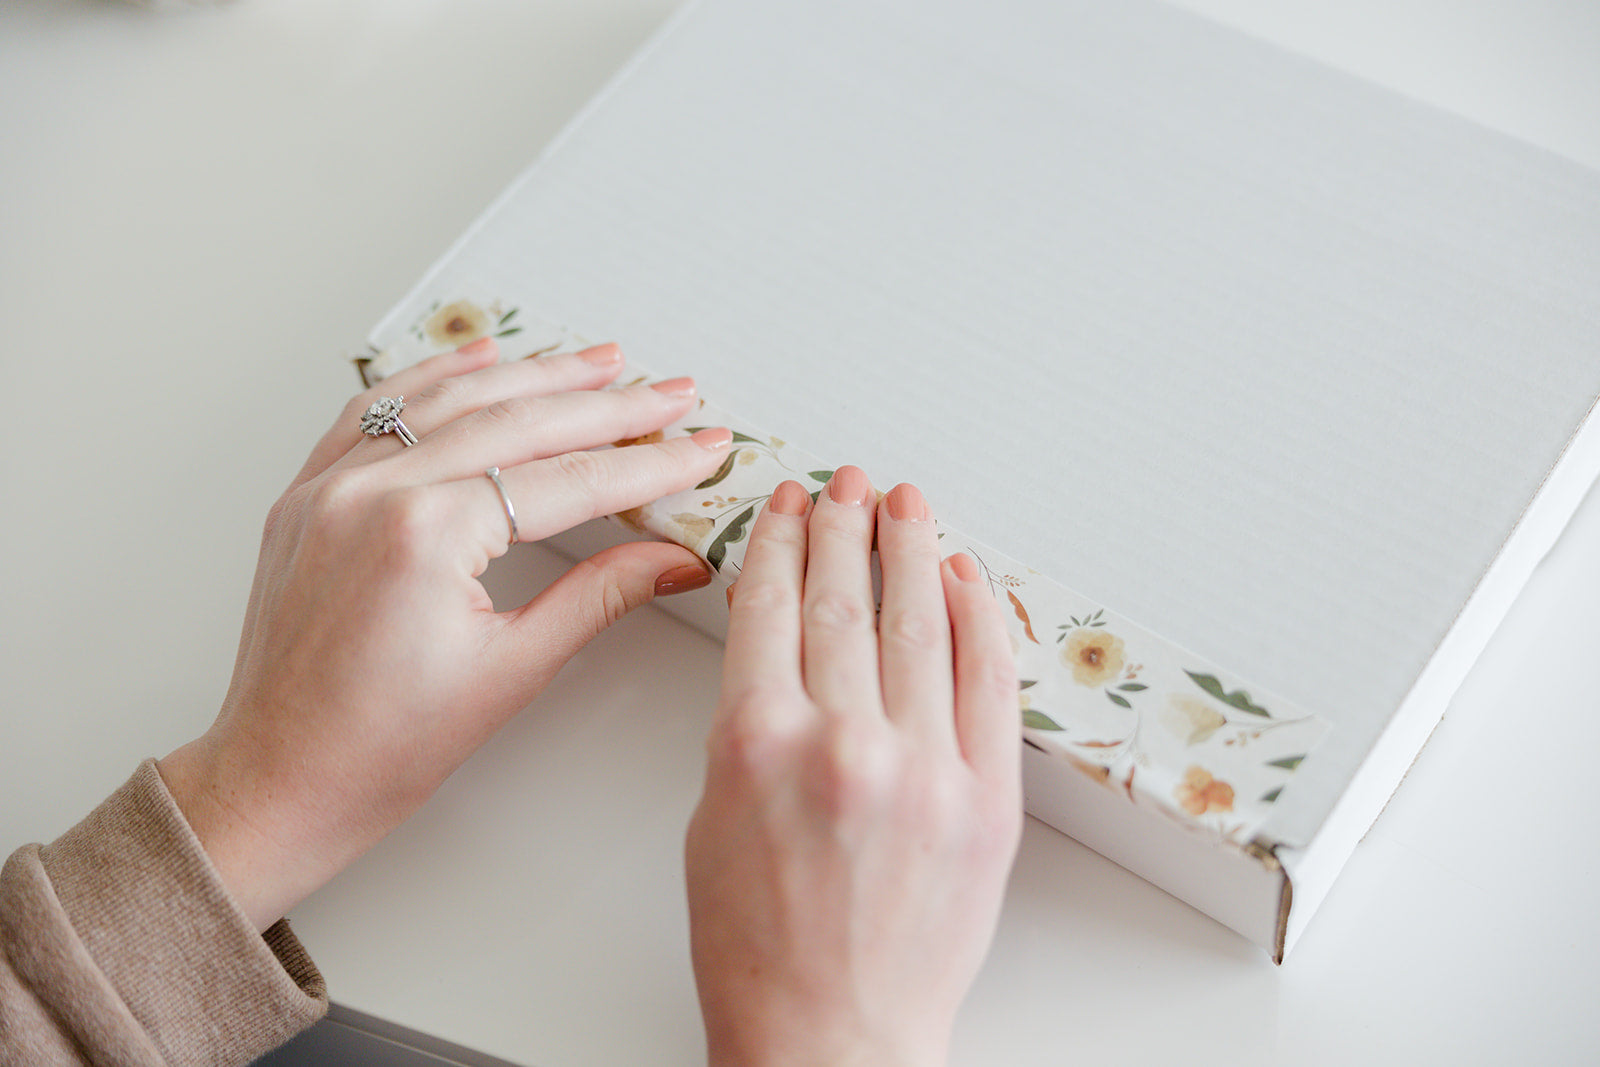 A woman's hands are opening up a white box sealed with Packing Tape - Camelia Bloom from impack.co.